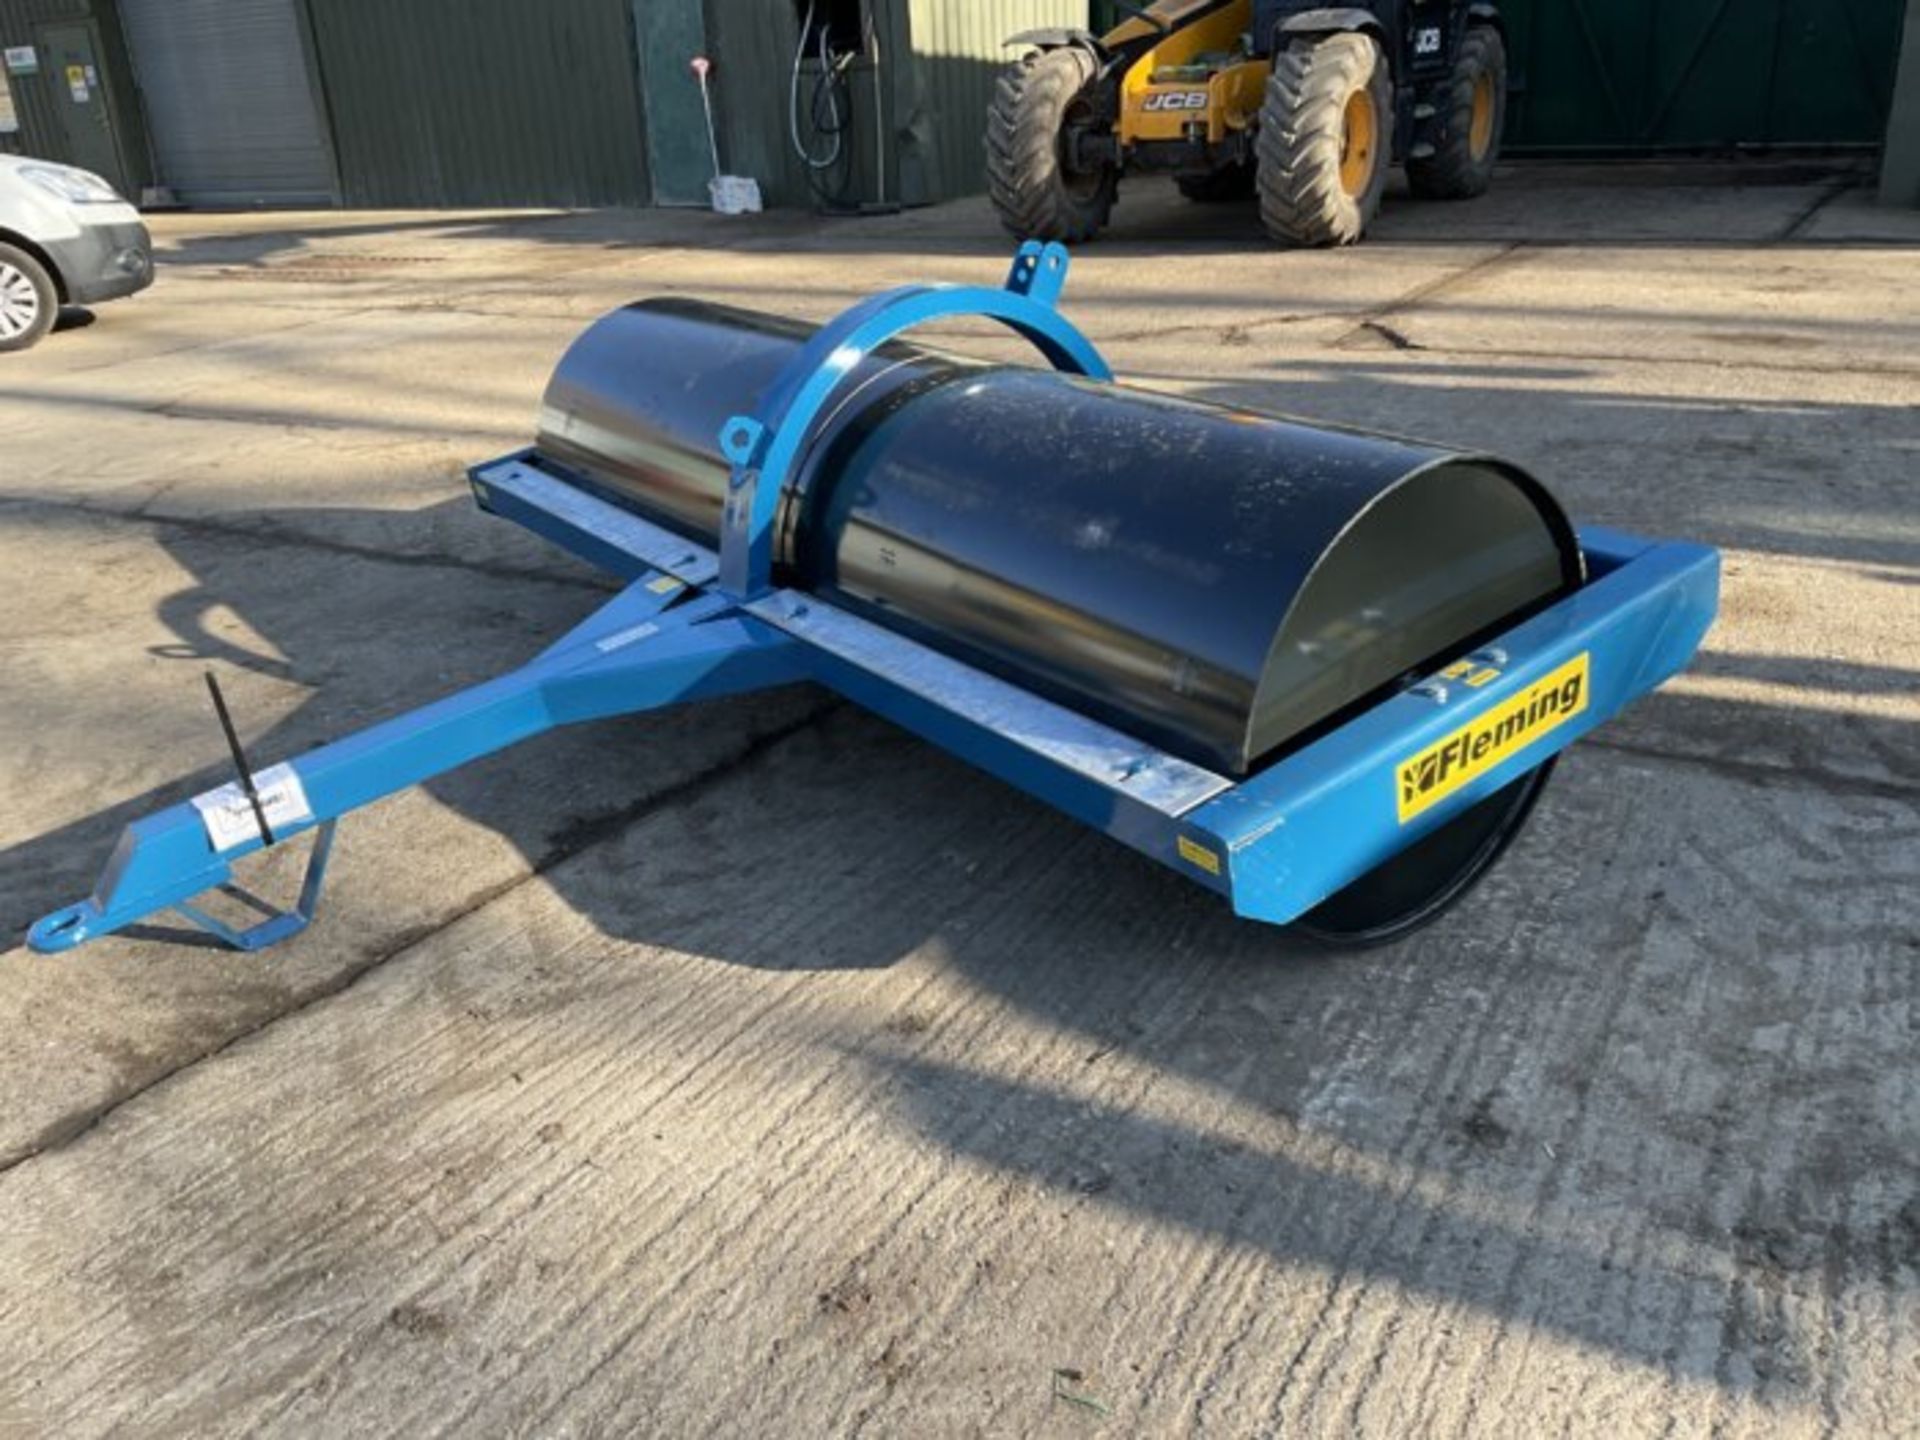 NEW FLEMING 8 X 30 X 10 ROLLER WITH SCRAPER. 3 POINT LINKAGE FOR TRANSPORT. - Image 6 of 7